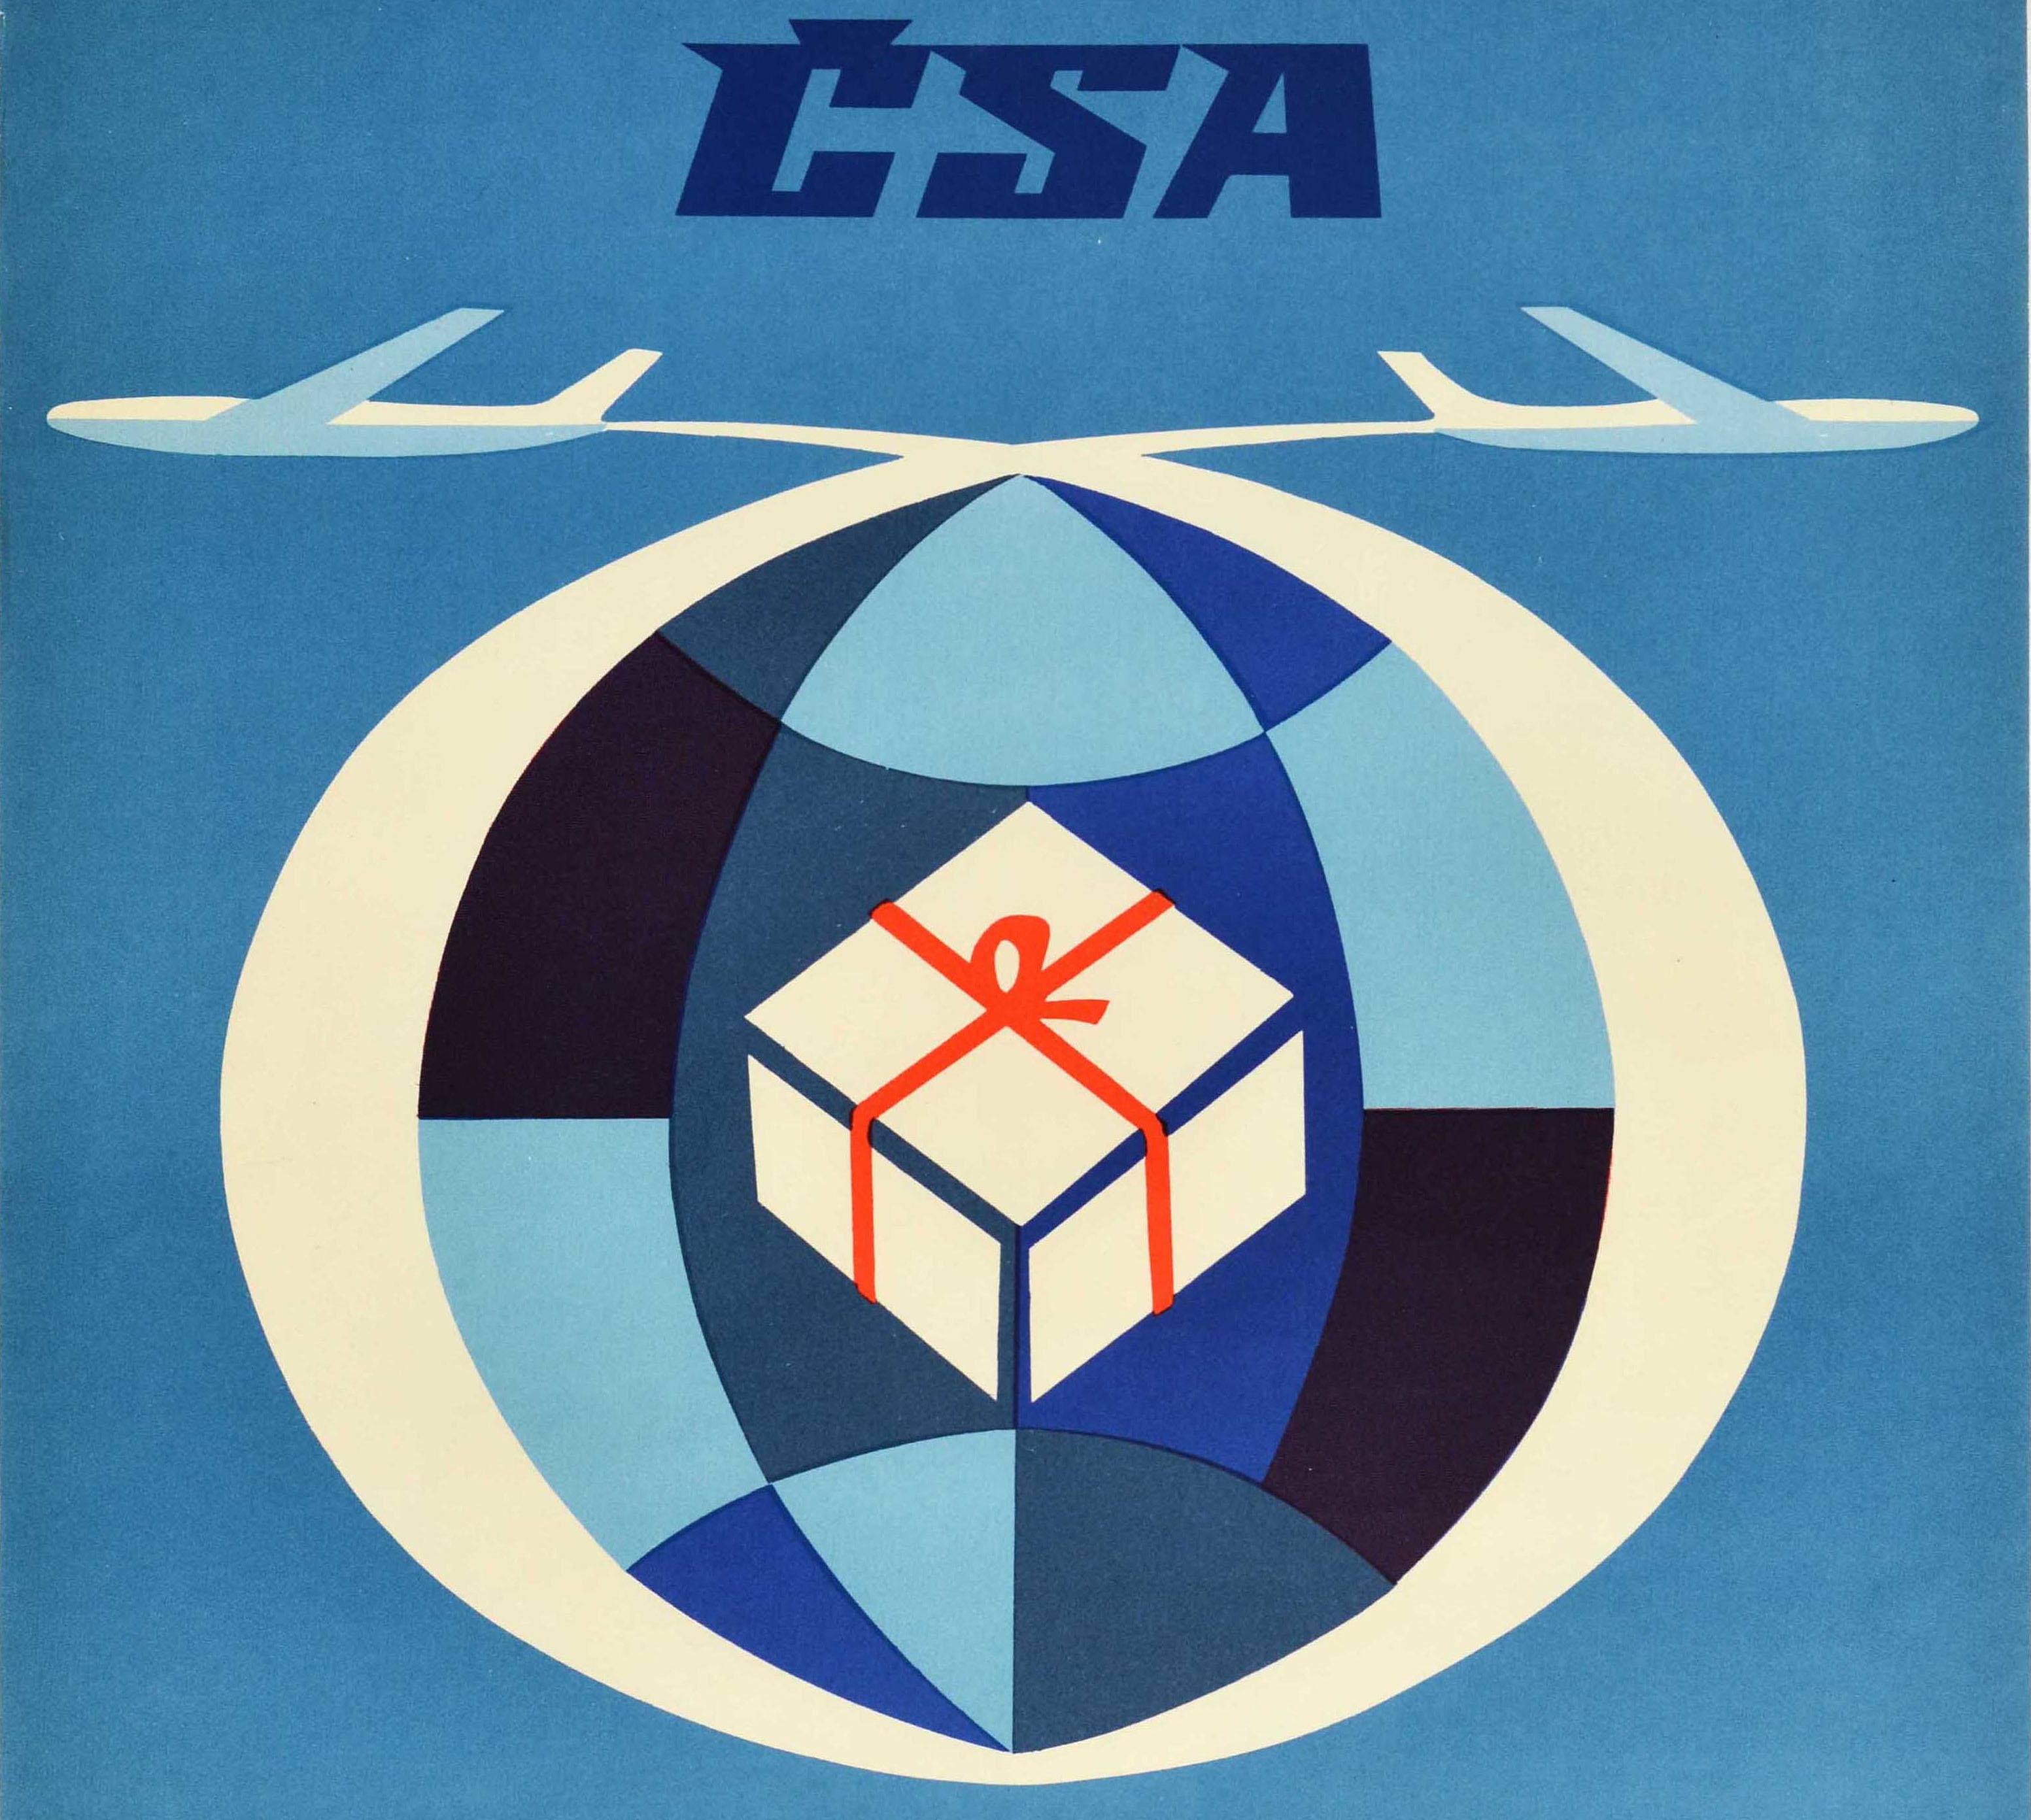 Original vintage poster advertising freight services with Czechoslovak Airlines / Ceskoslovenske Aerolinie - Fly your cargo by CSA Quick delivery Less packaging Satisfied customer - featuring a great mid-century graphic design of a parcel tied with